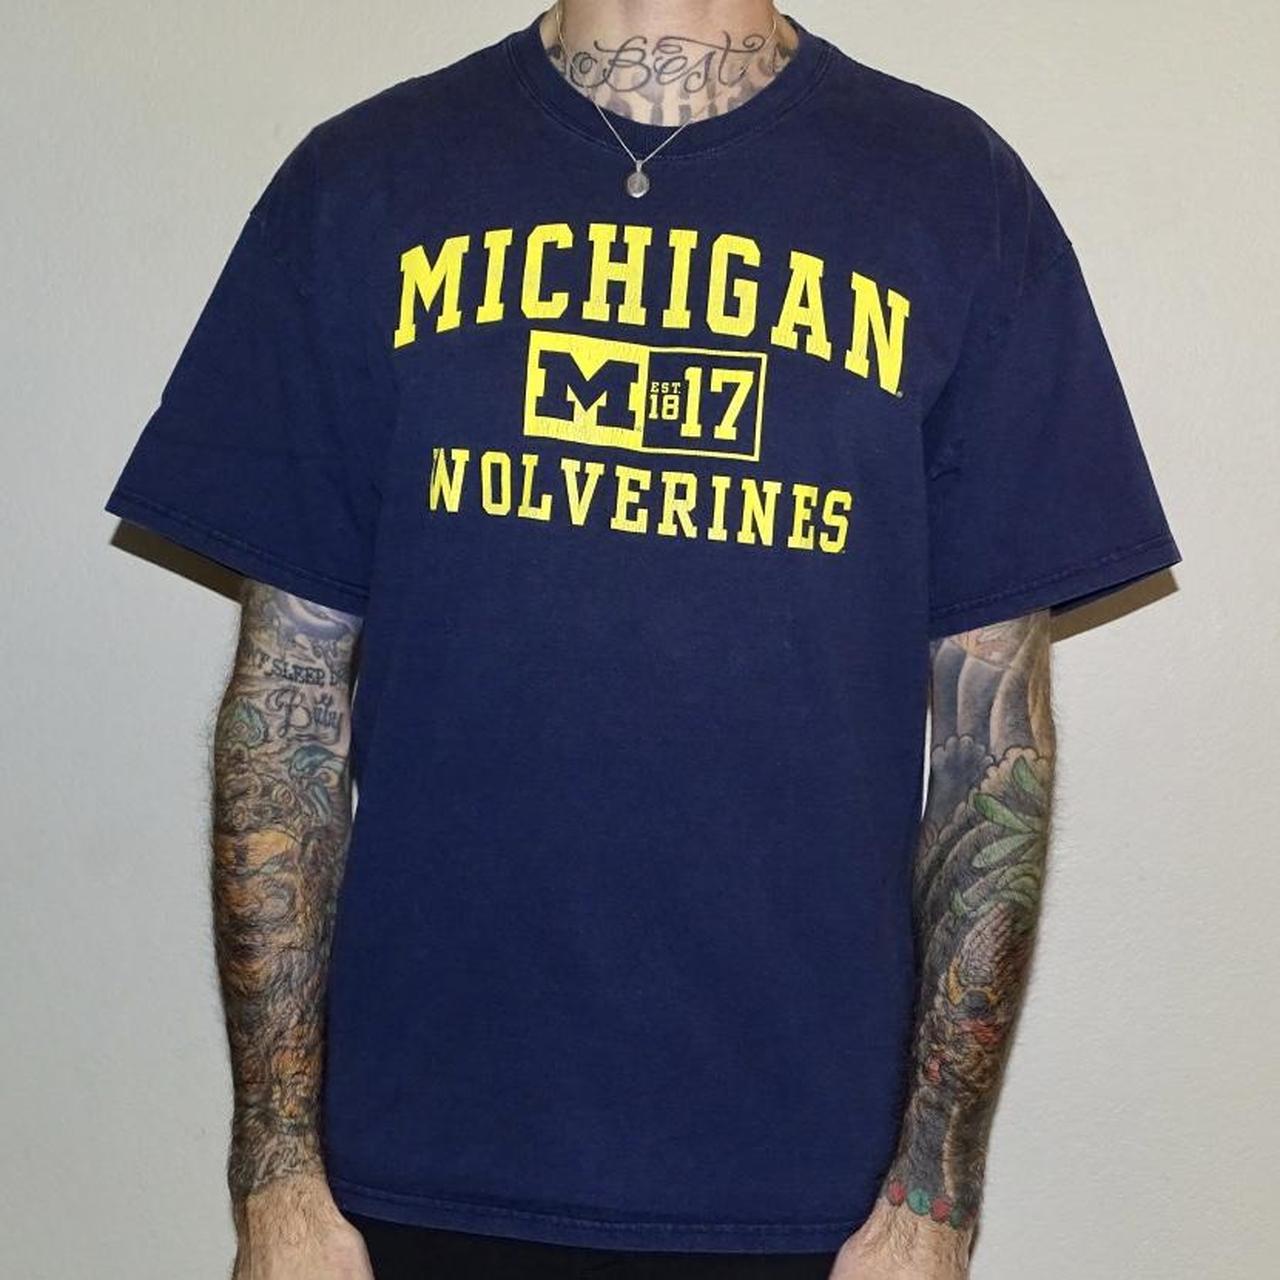 American Vintage Men's Navy and Yellow T-shirt (4)